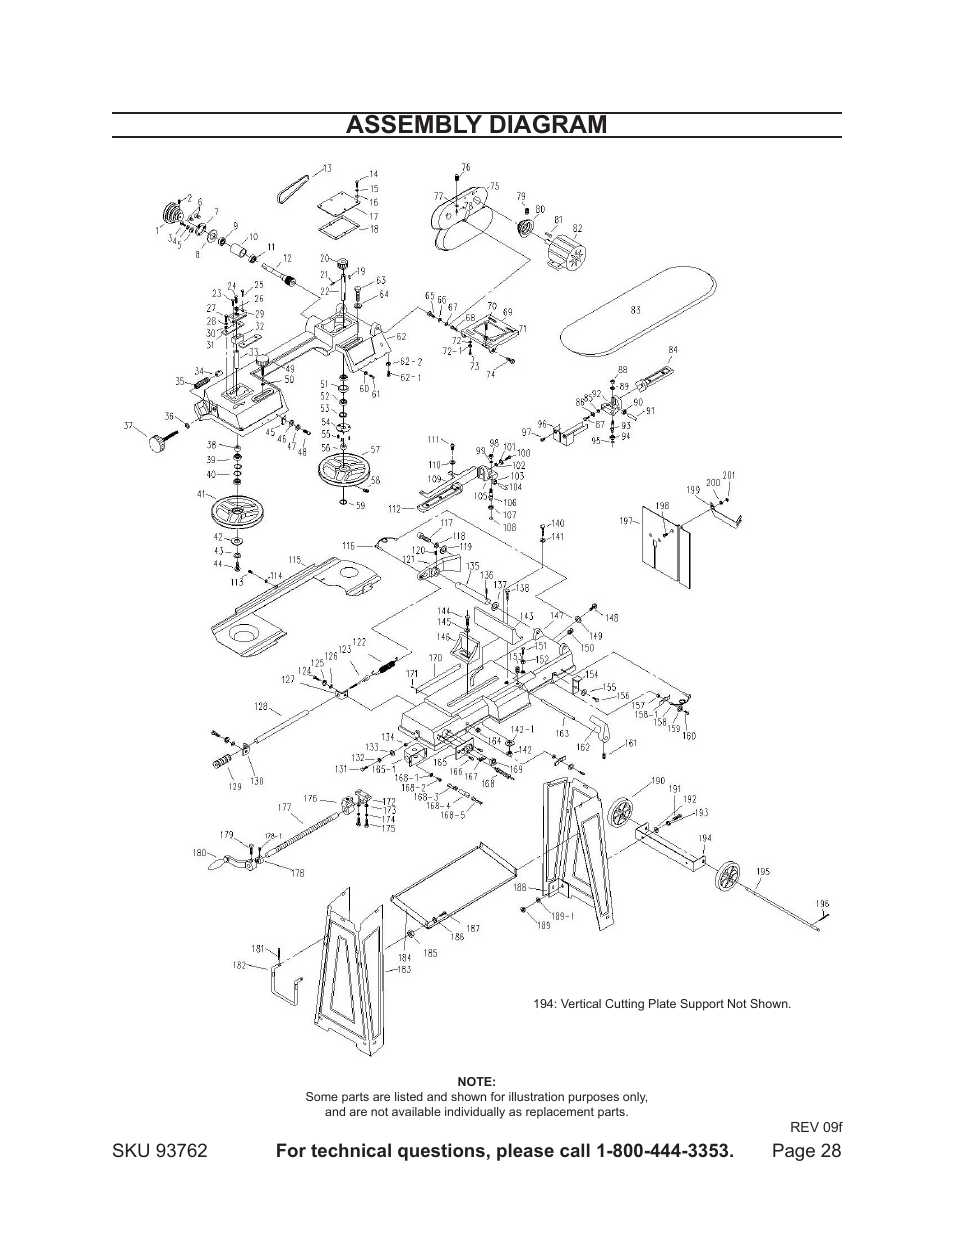 Assembly diagram | Harbor Freight Tools METAL CUTTING BANDSAW 93762